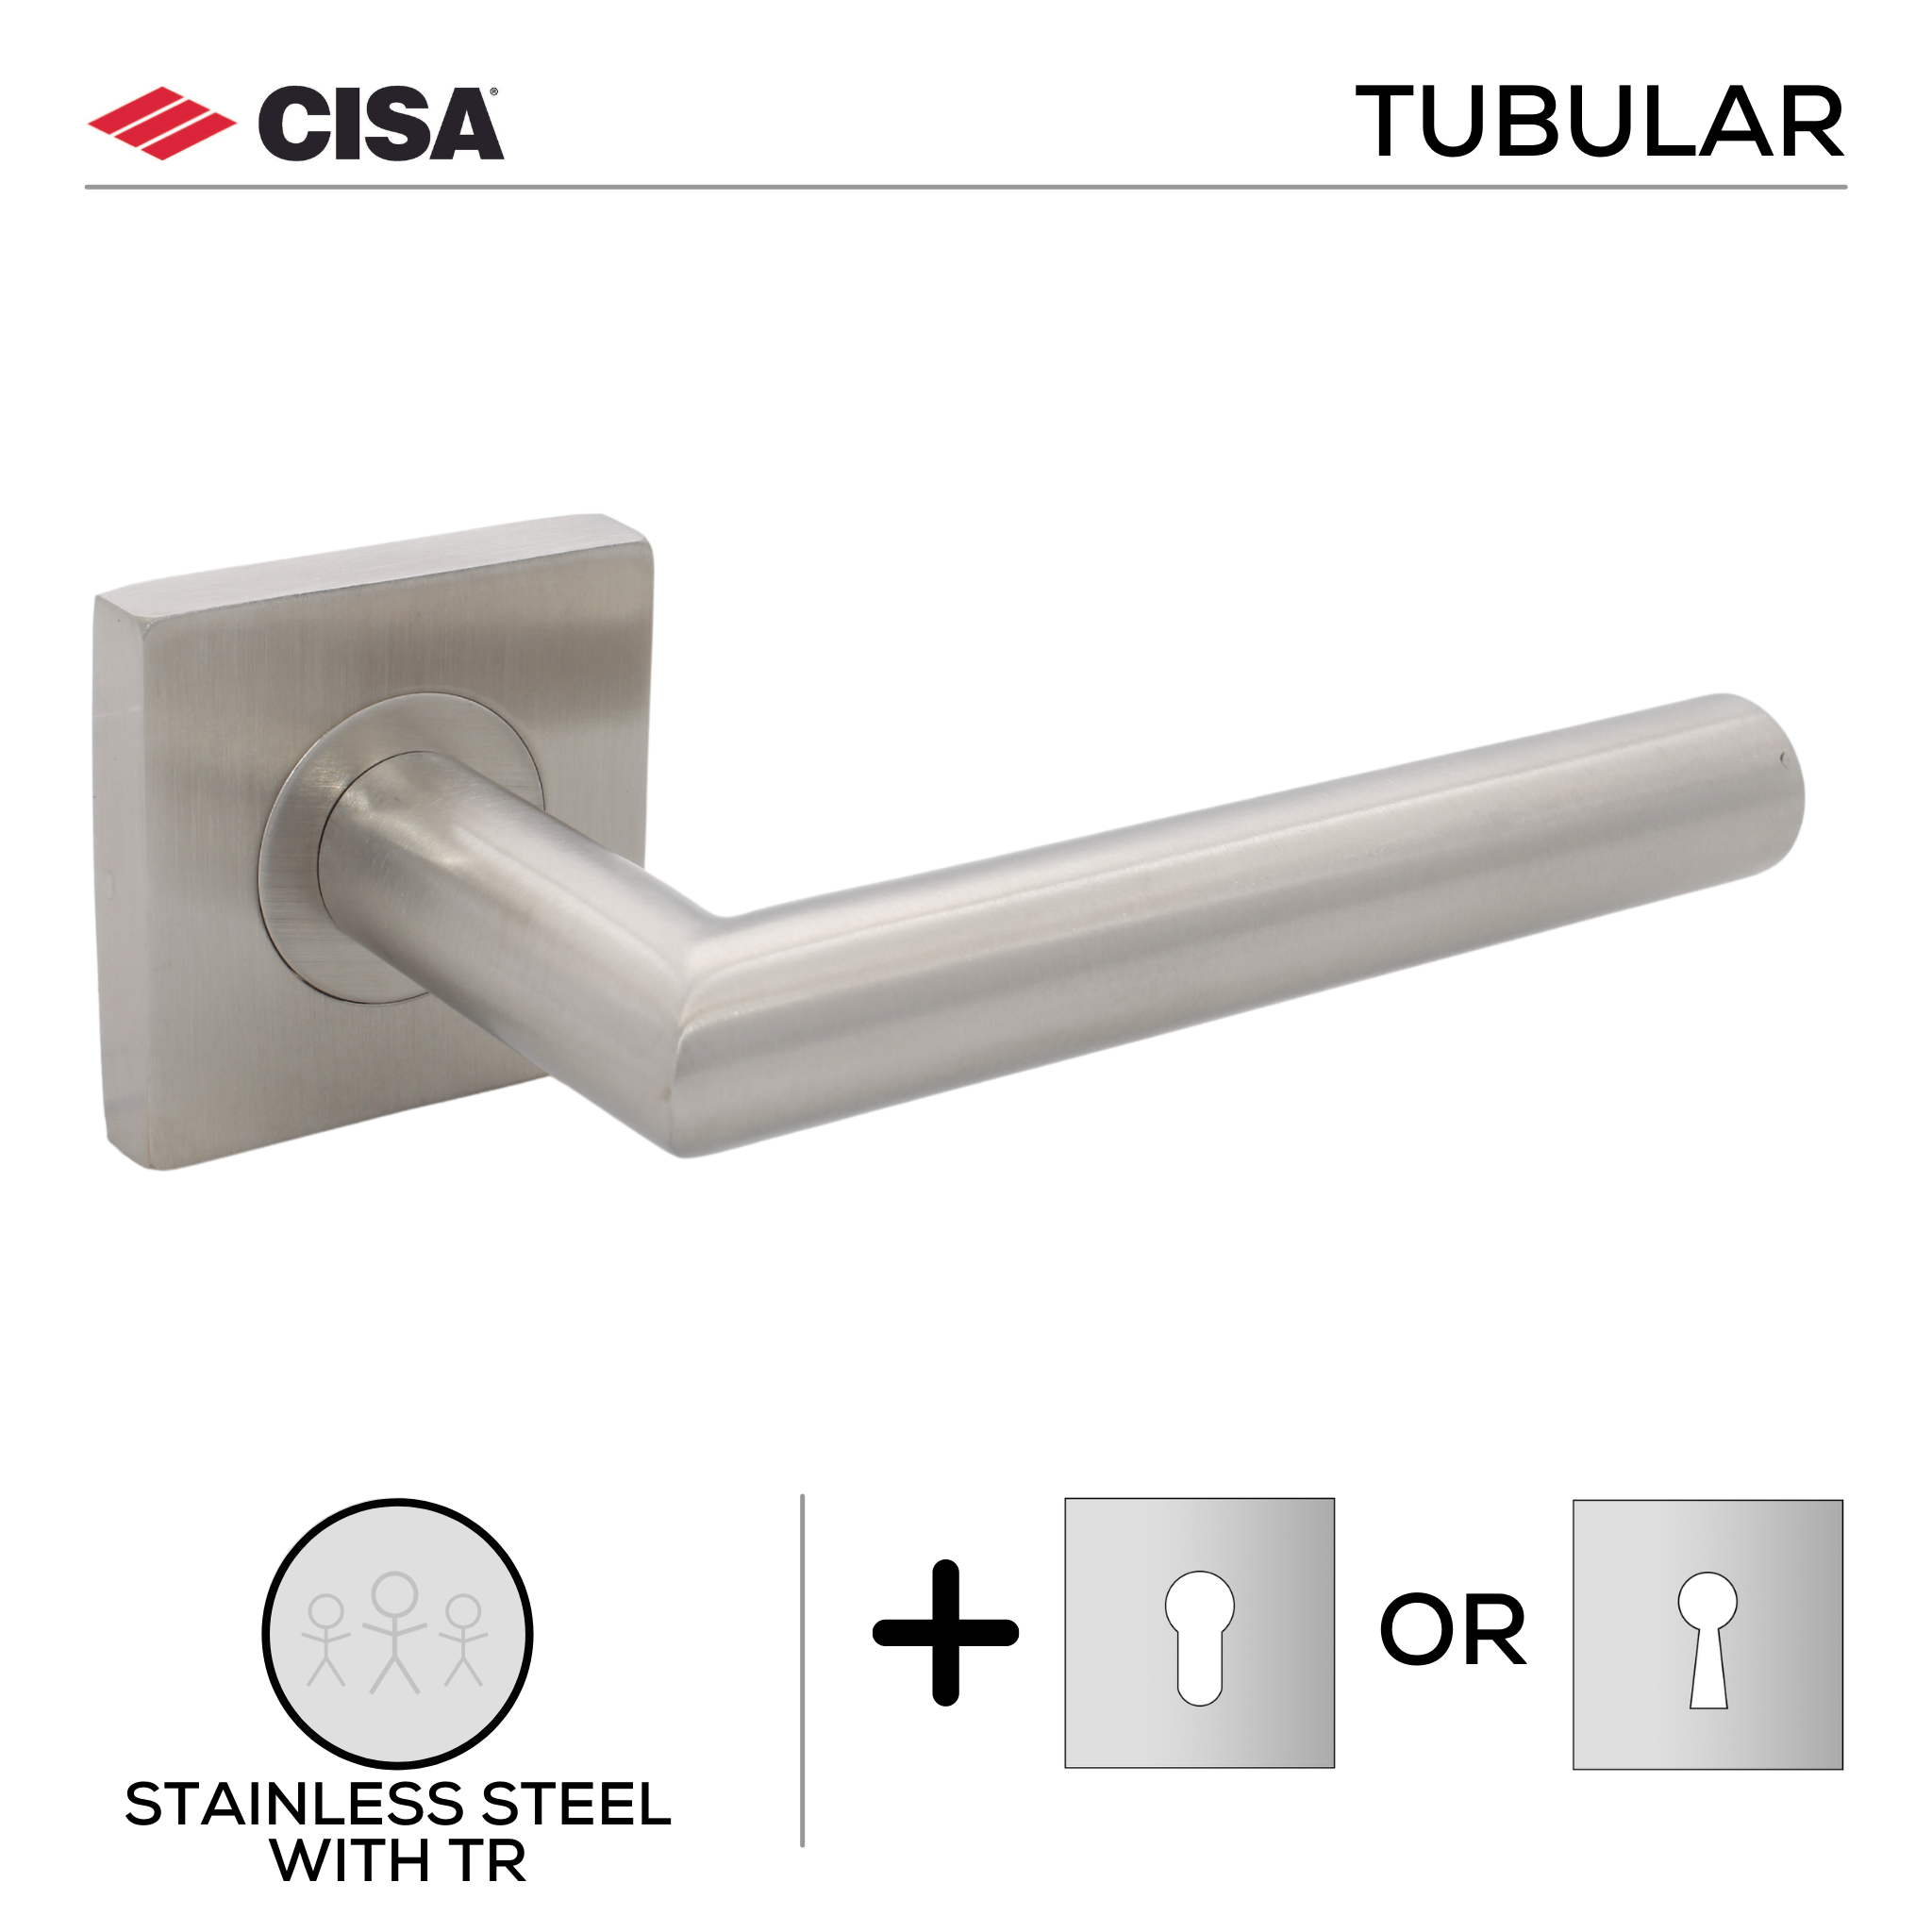 FT02.S._.TR, Lever Handles, Tubular, On Square Rose, With Escutcheons, 134mm (l), Stainless Steel with Tarnish Resistant, CISA